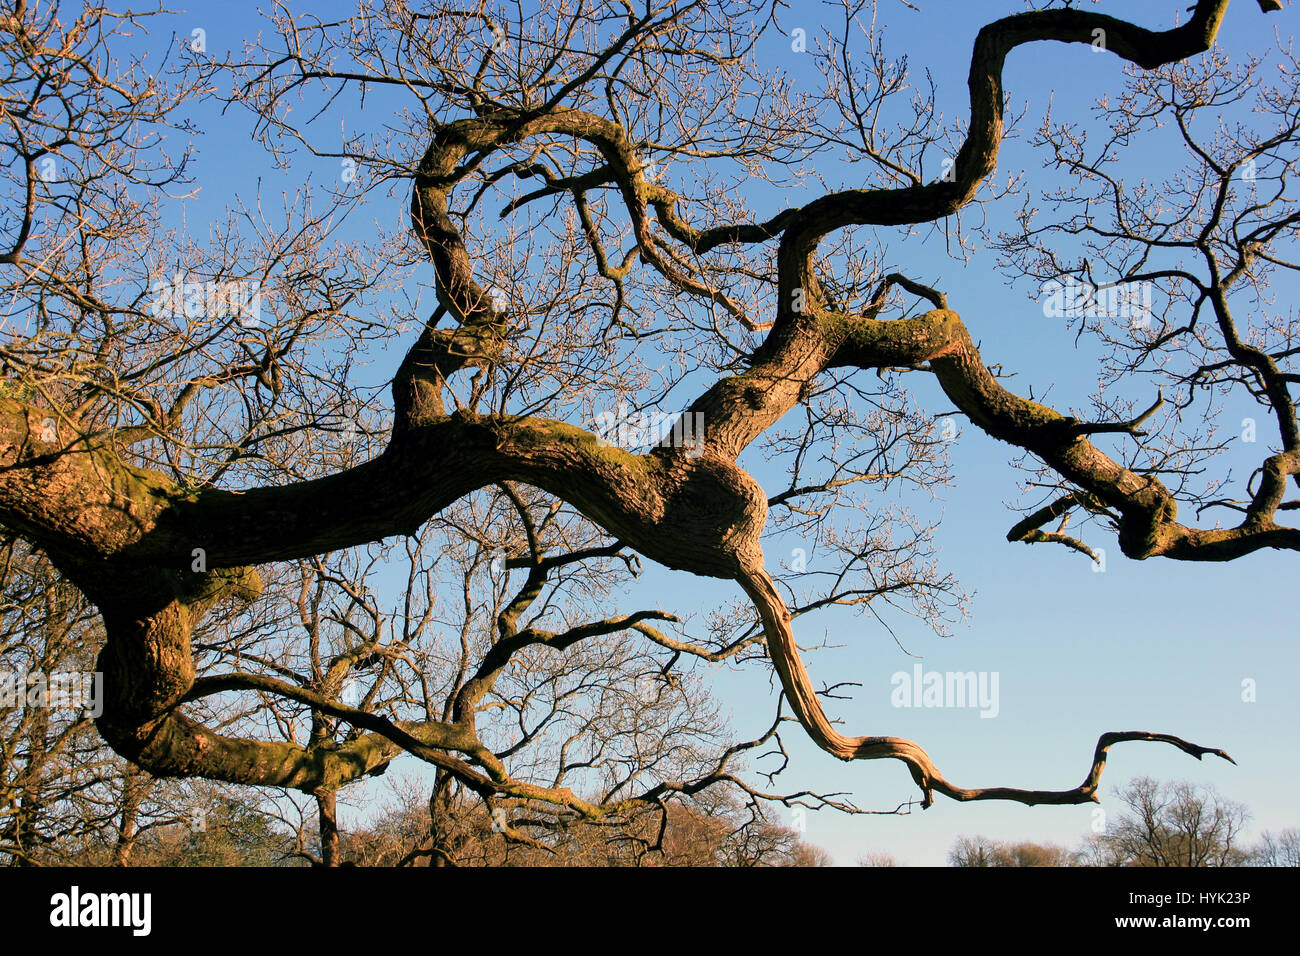 Ancient Oak Tree branches. Twisted branches against a blue sky. Stock Photo